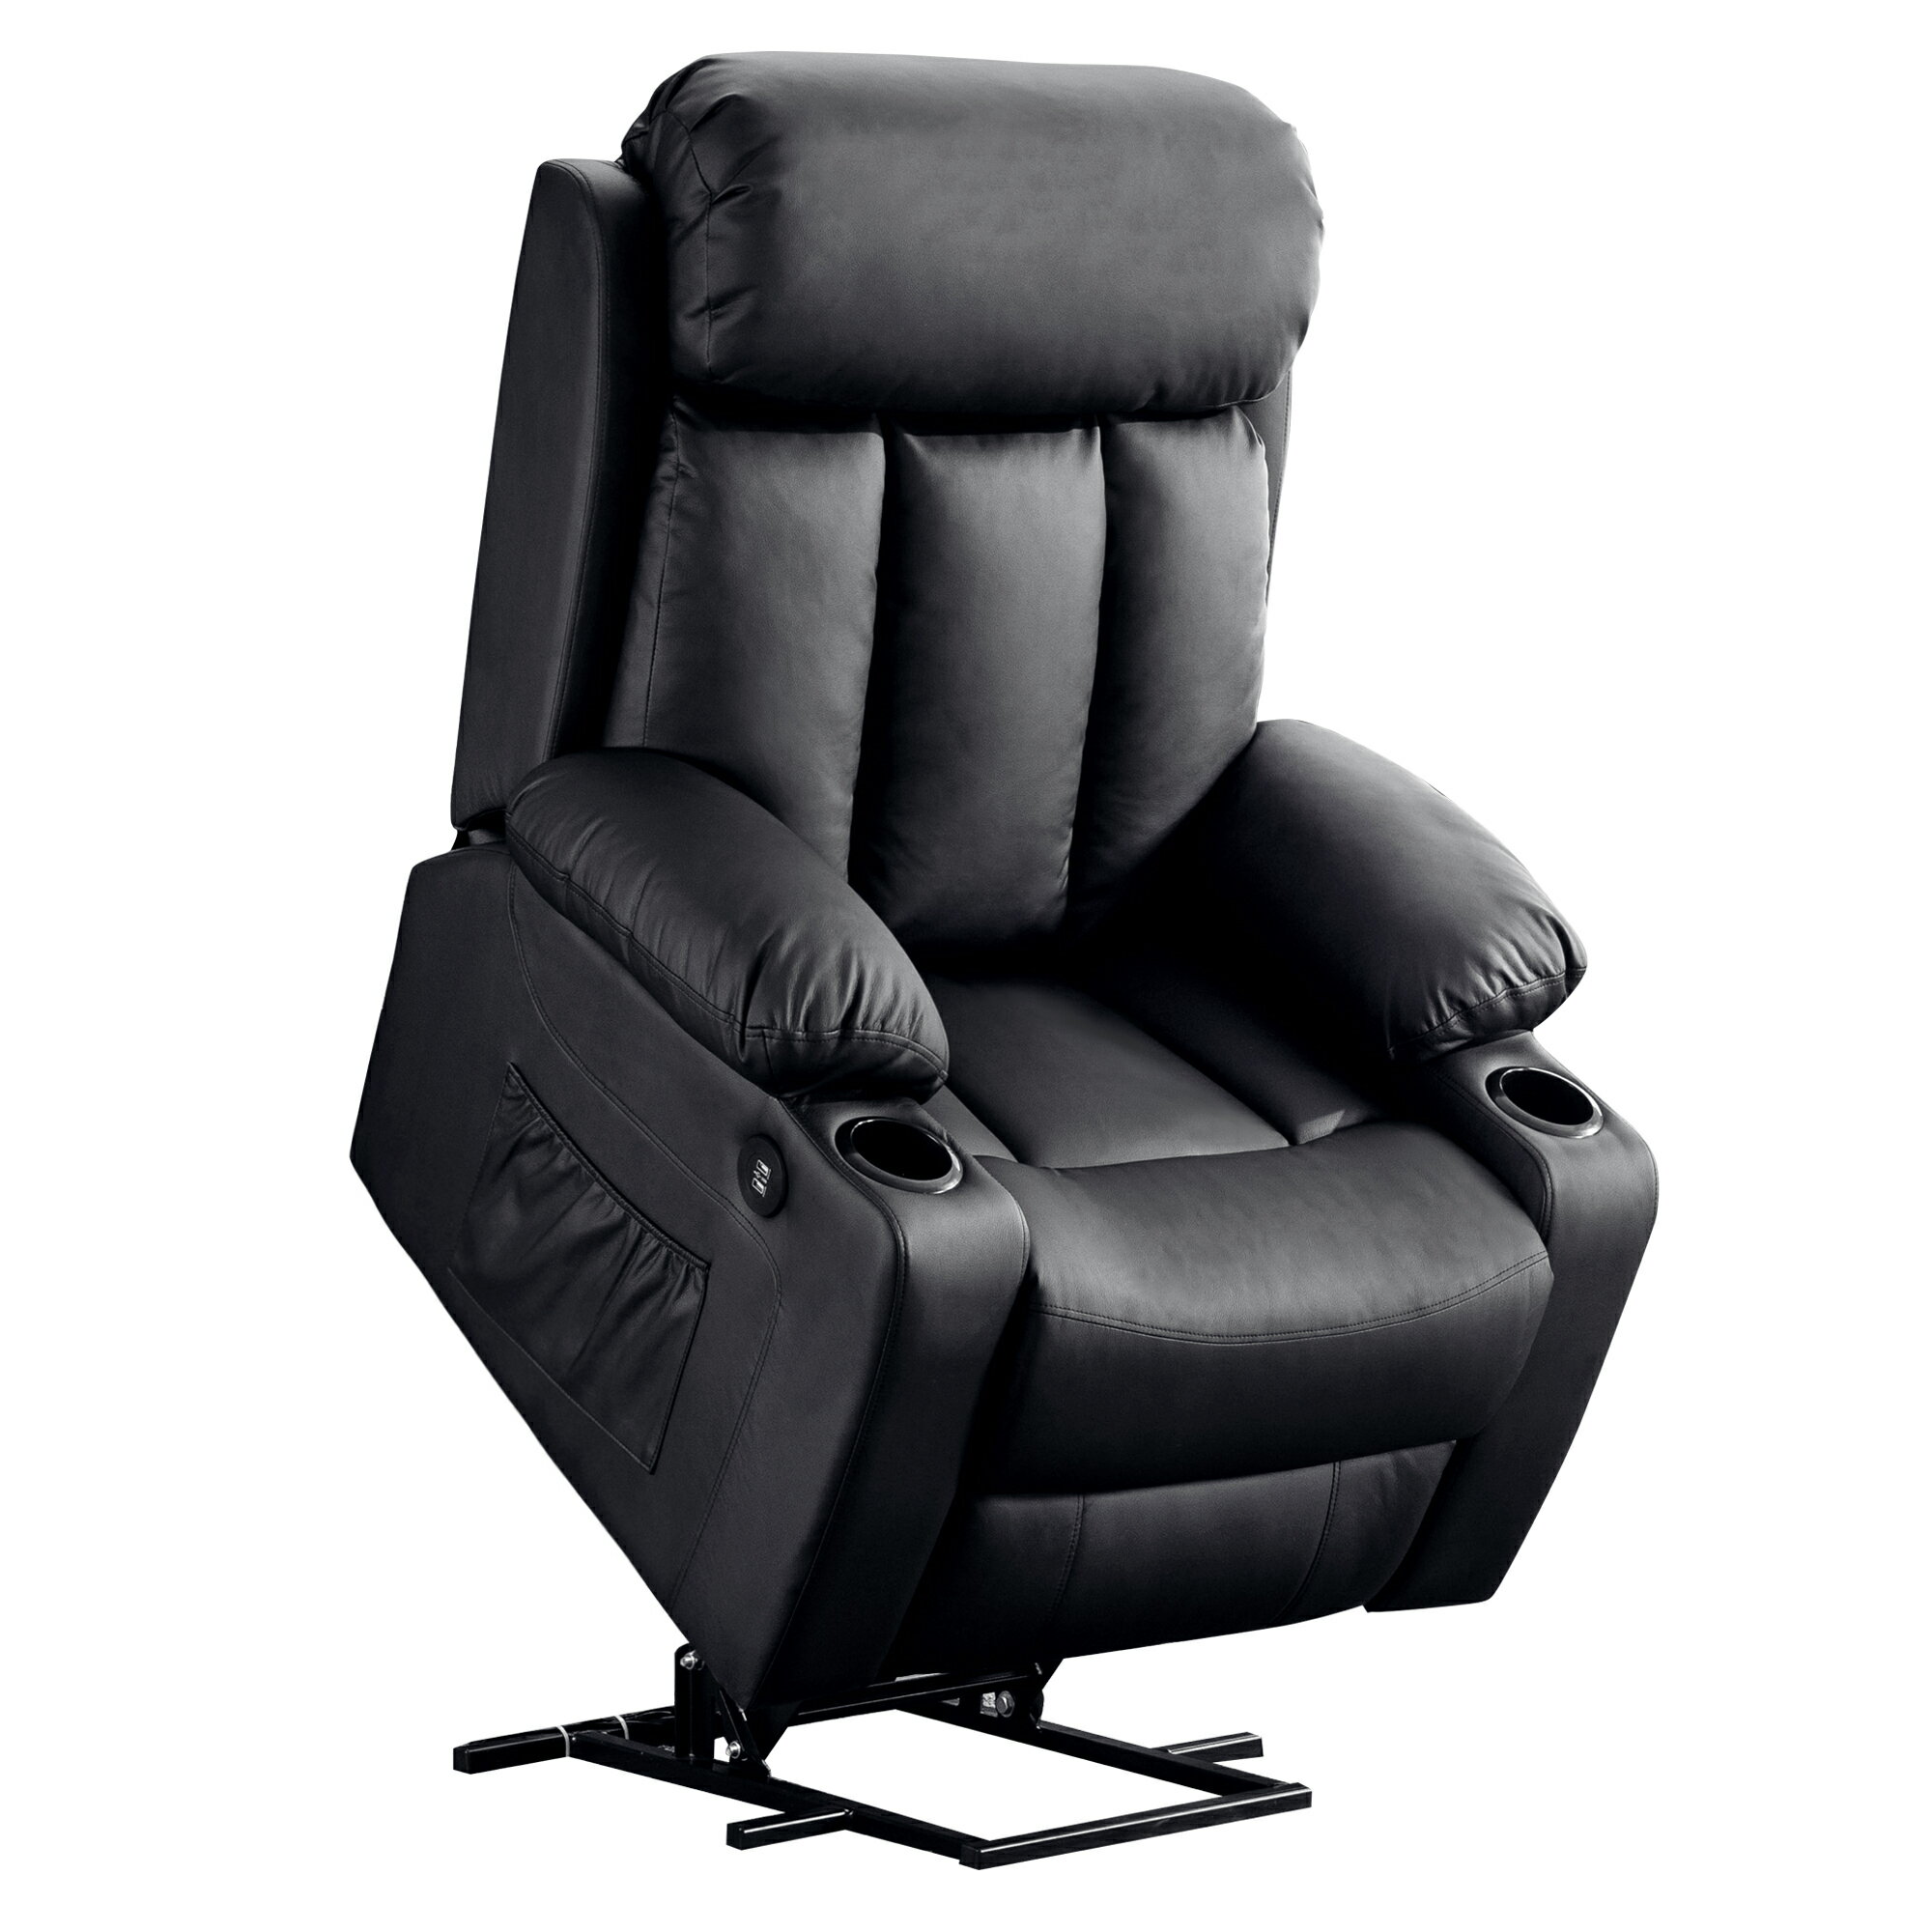 Mcombo Mcombo Oversized Electric Power Lift Recliner Chair Sofa